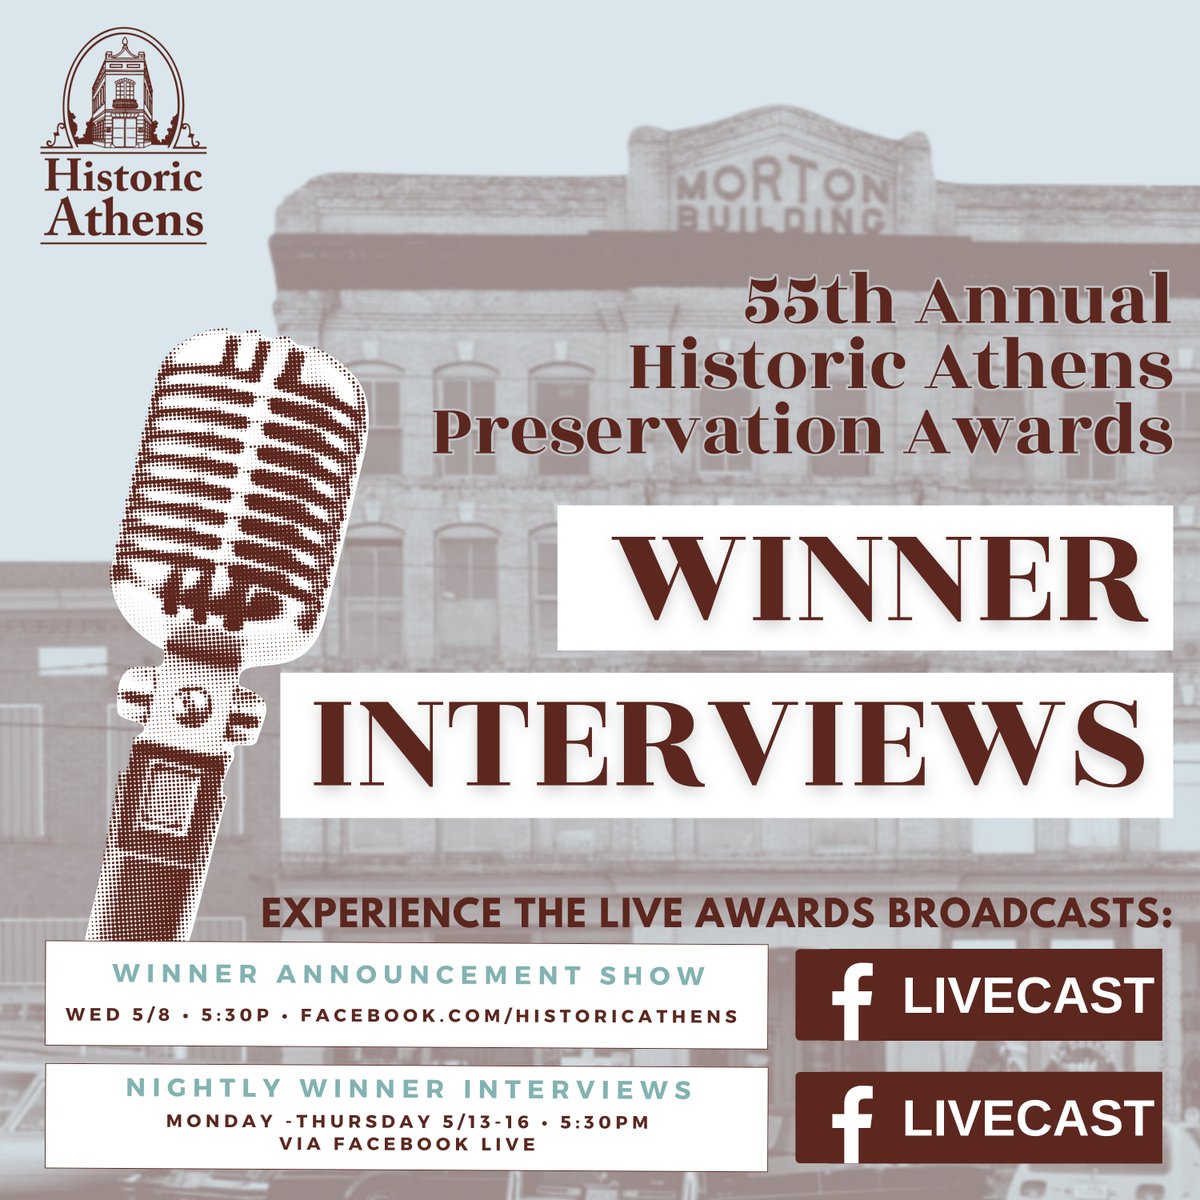 Exciting news ahead! 🏆 Join us this Wednesday for a live announcement as we reveal the 2024 Historic Athens Preservation Award winners! Then, Monday through Thursday, we'll sit down for exclusive one-on-one chats with each winner, diving deep into their inspiring projects.